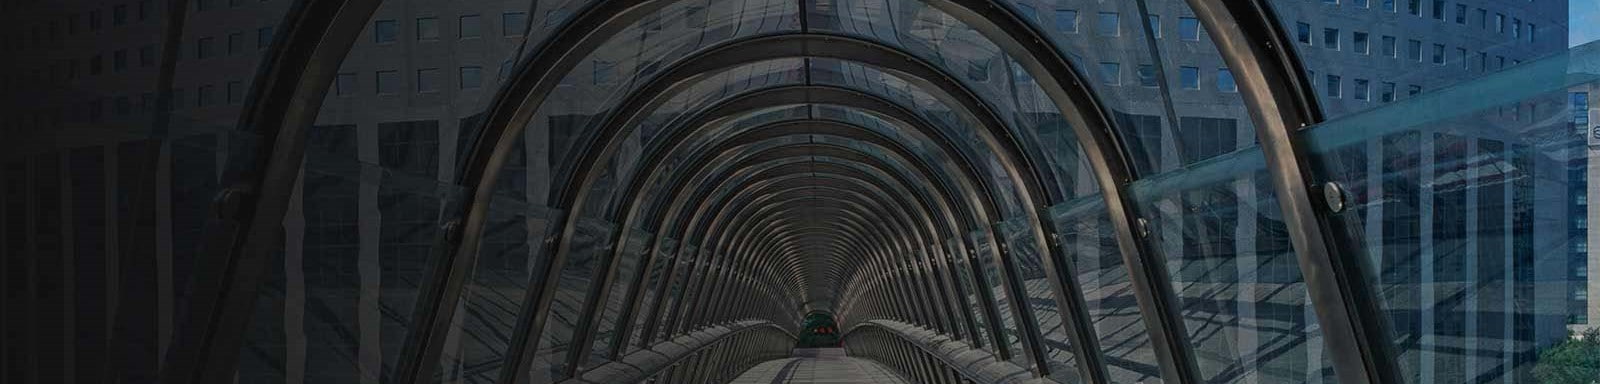 Interior view of a glass tunnel